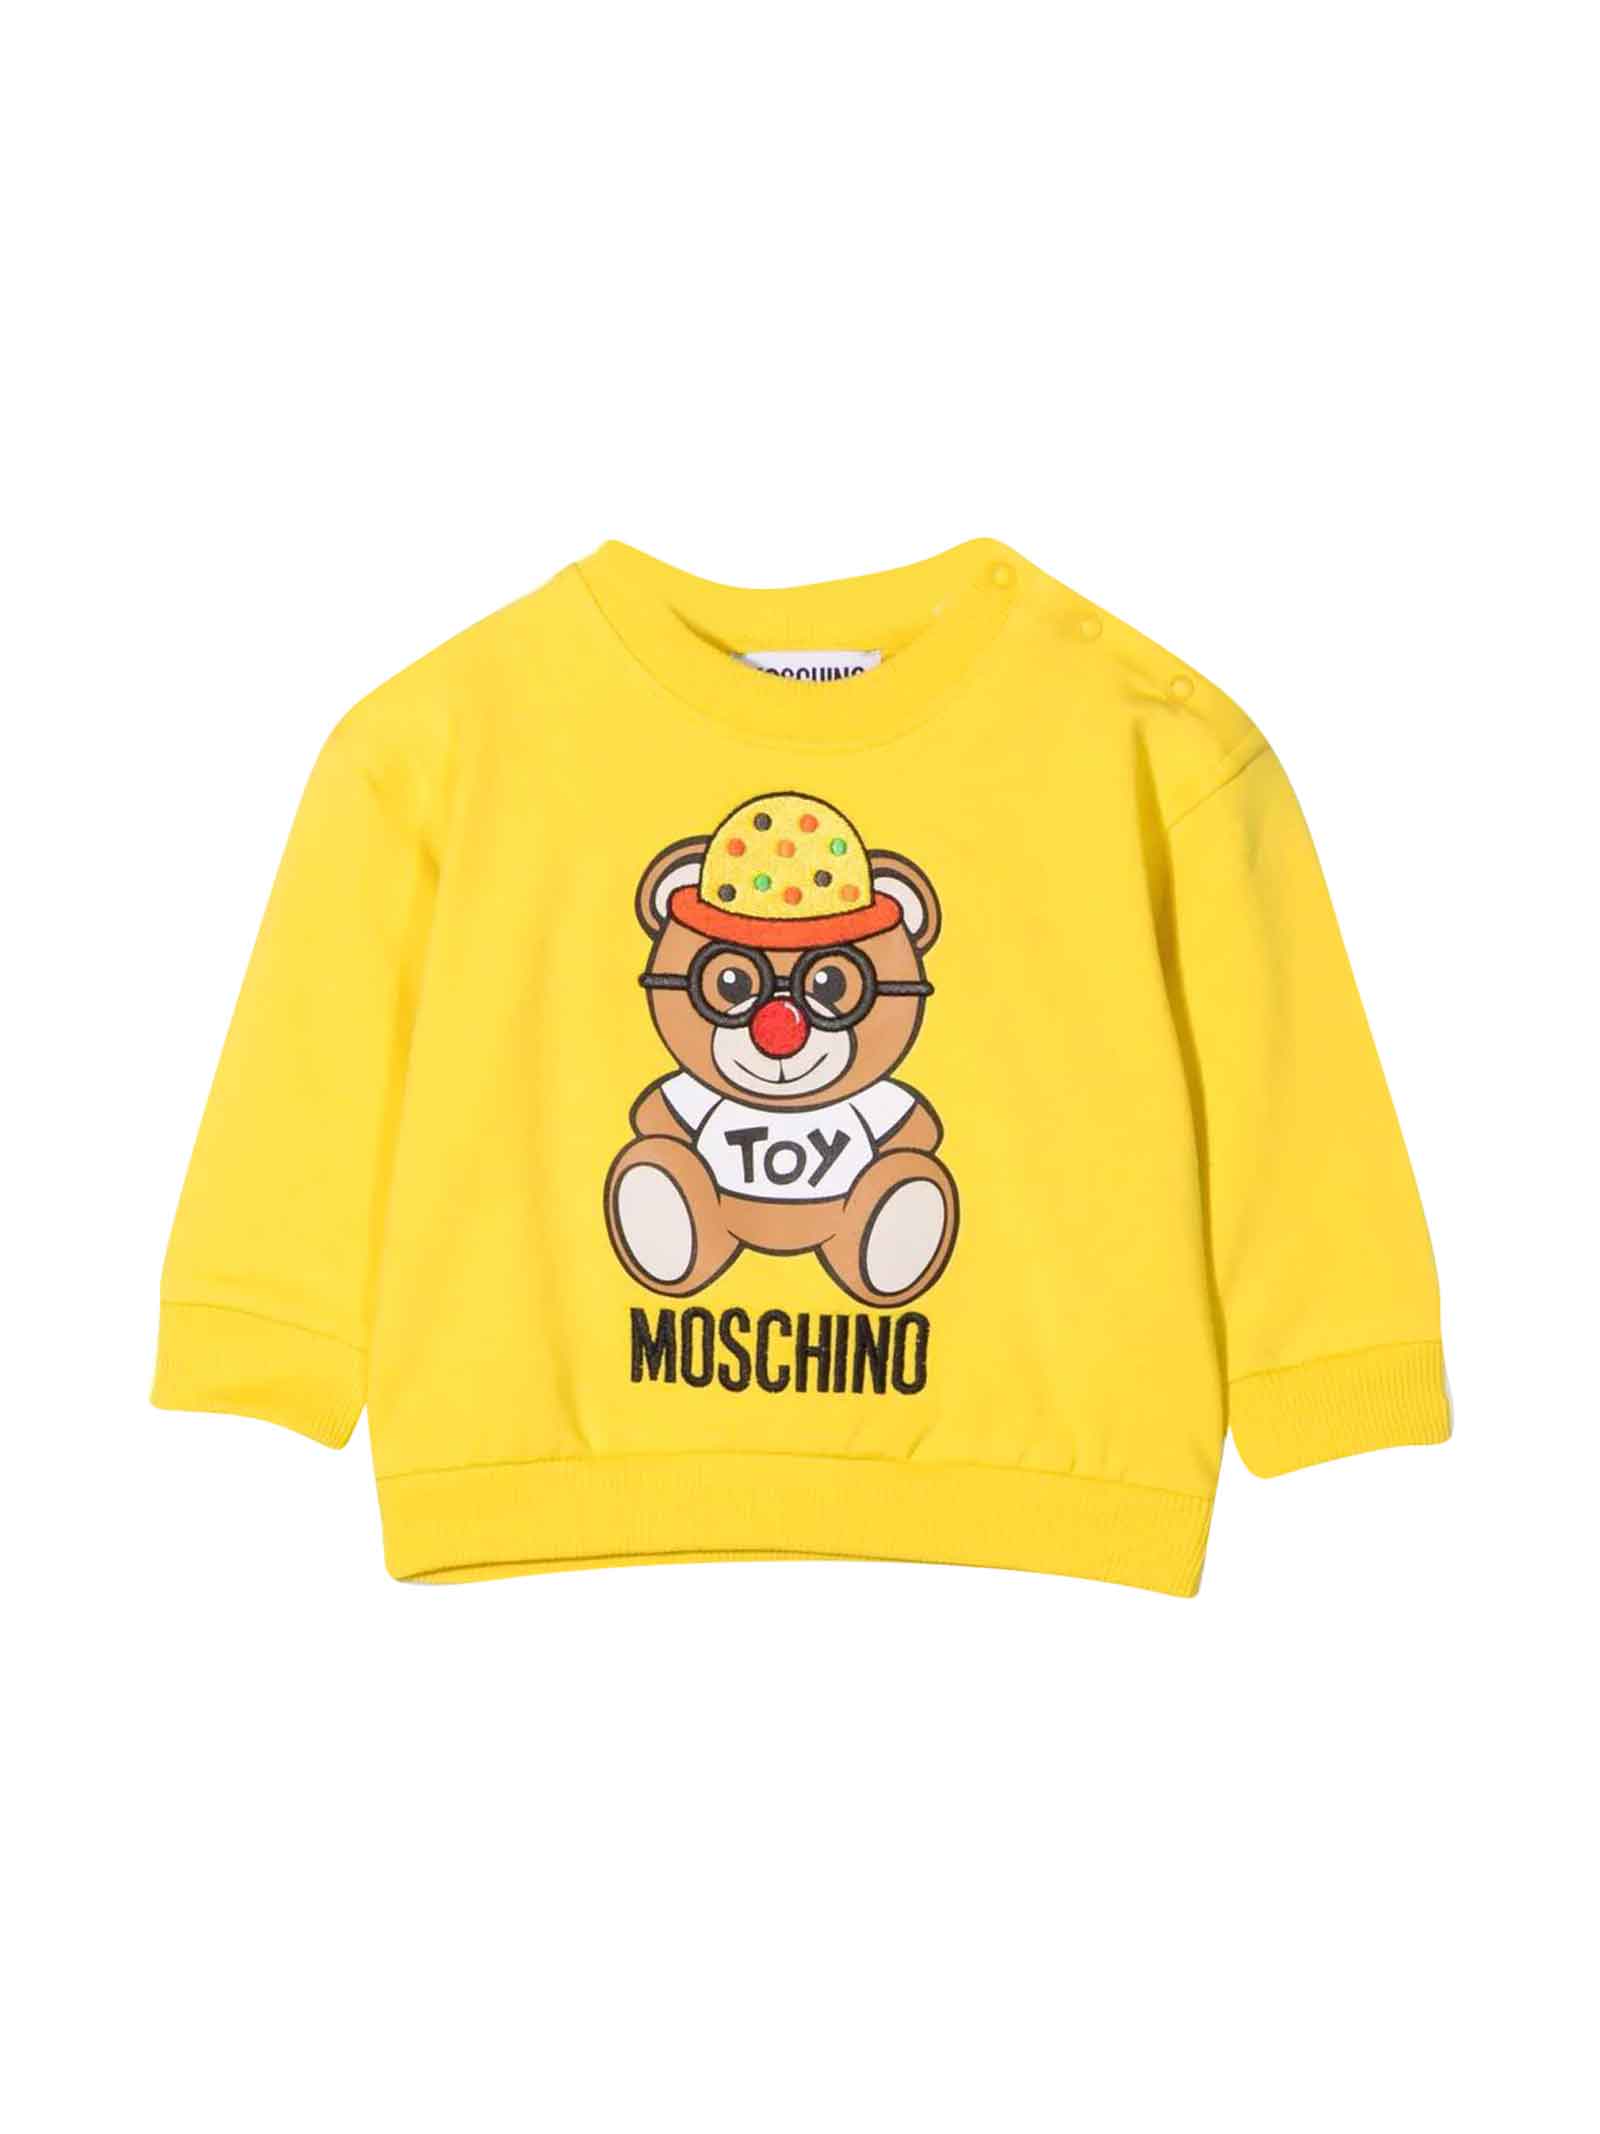 Moschino Yellow T-shirt With Toy Print